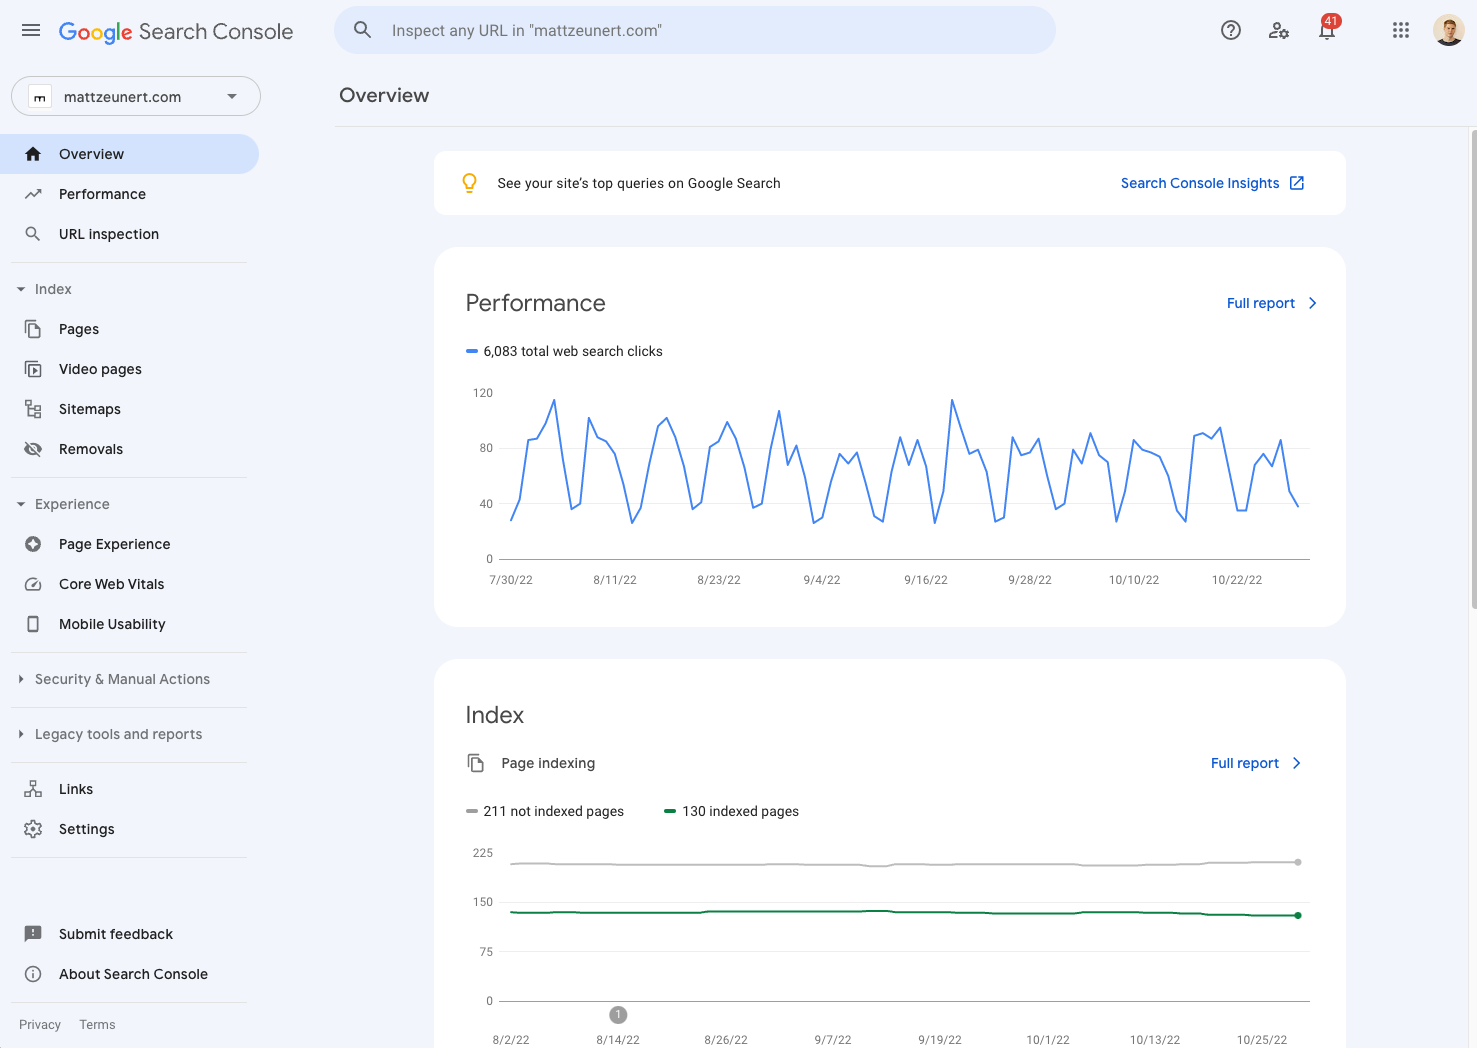 Google Search Console Overview Dashboard